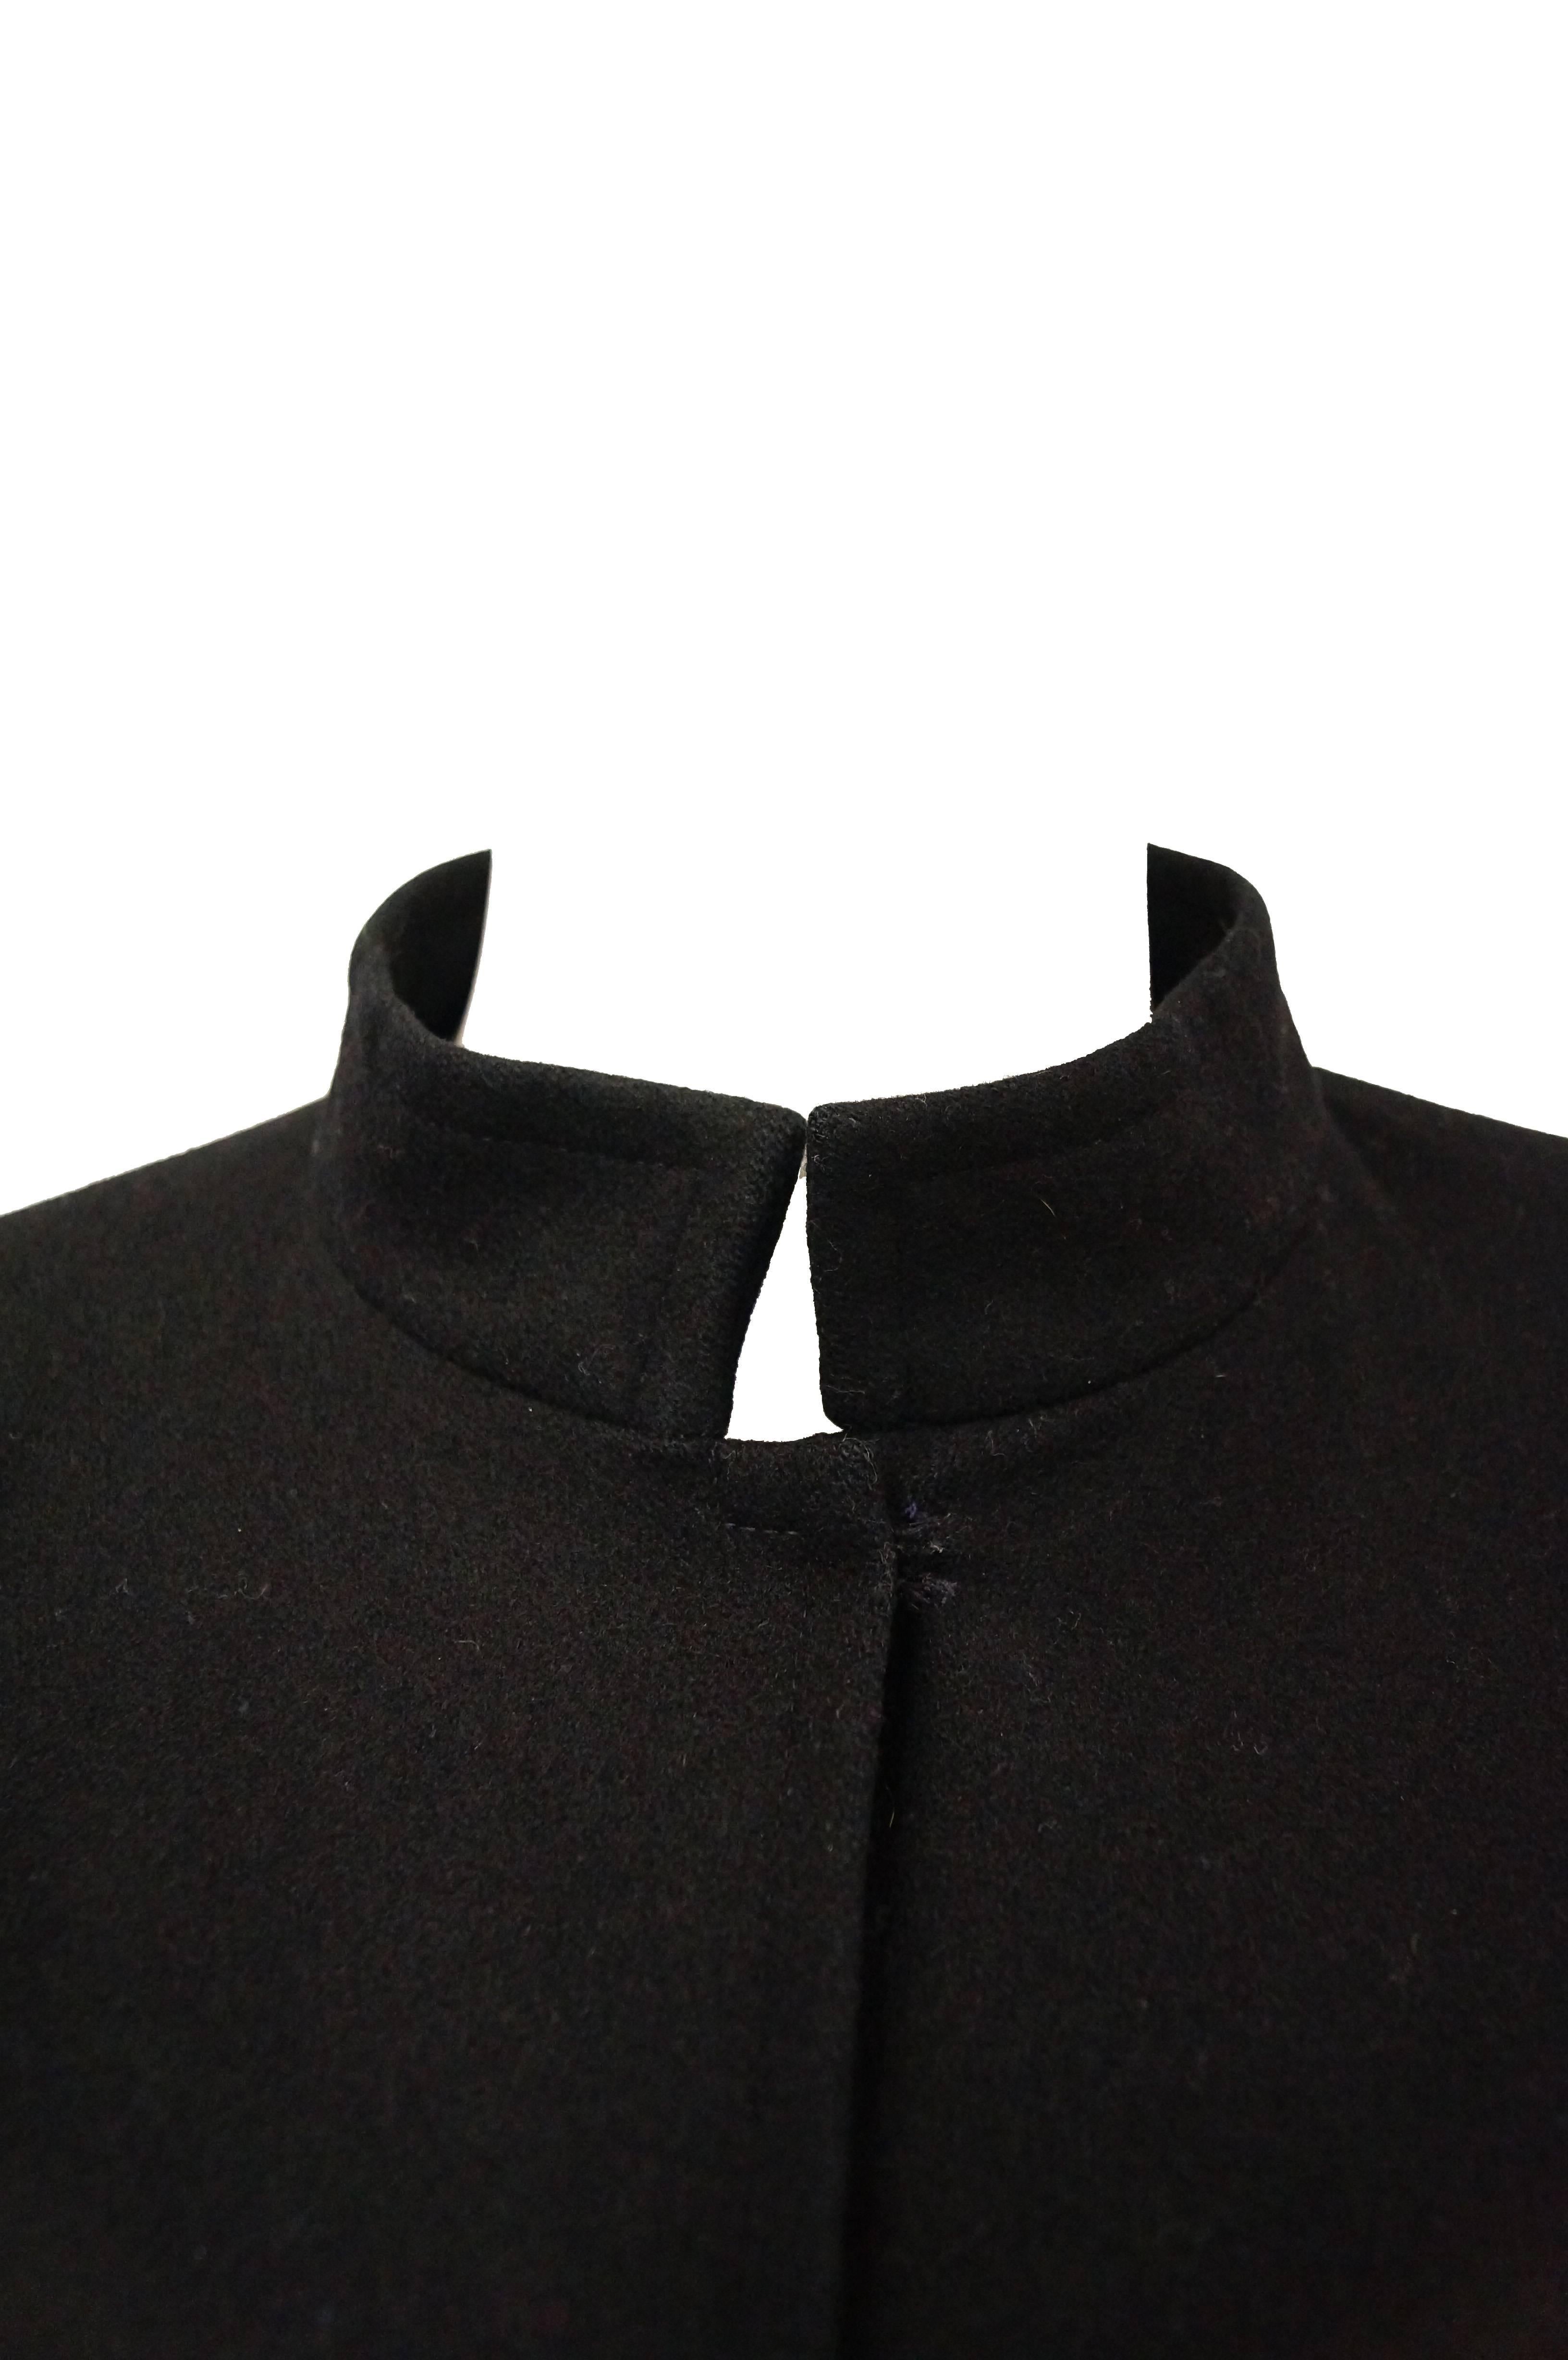 This iconic black wool Yves Saint Laurent cape is mid-calf length and features snaps for closure on the neck. The cape consists of a generous amount of solid black couture raised twill weaved wool, allowing it to slowly and softly billow with